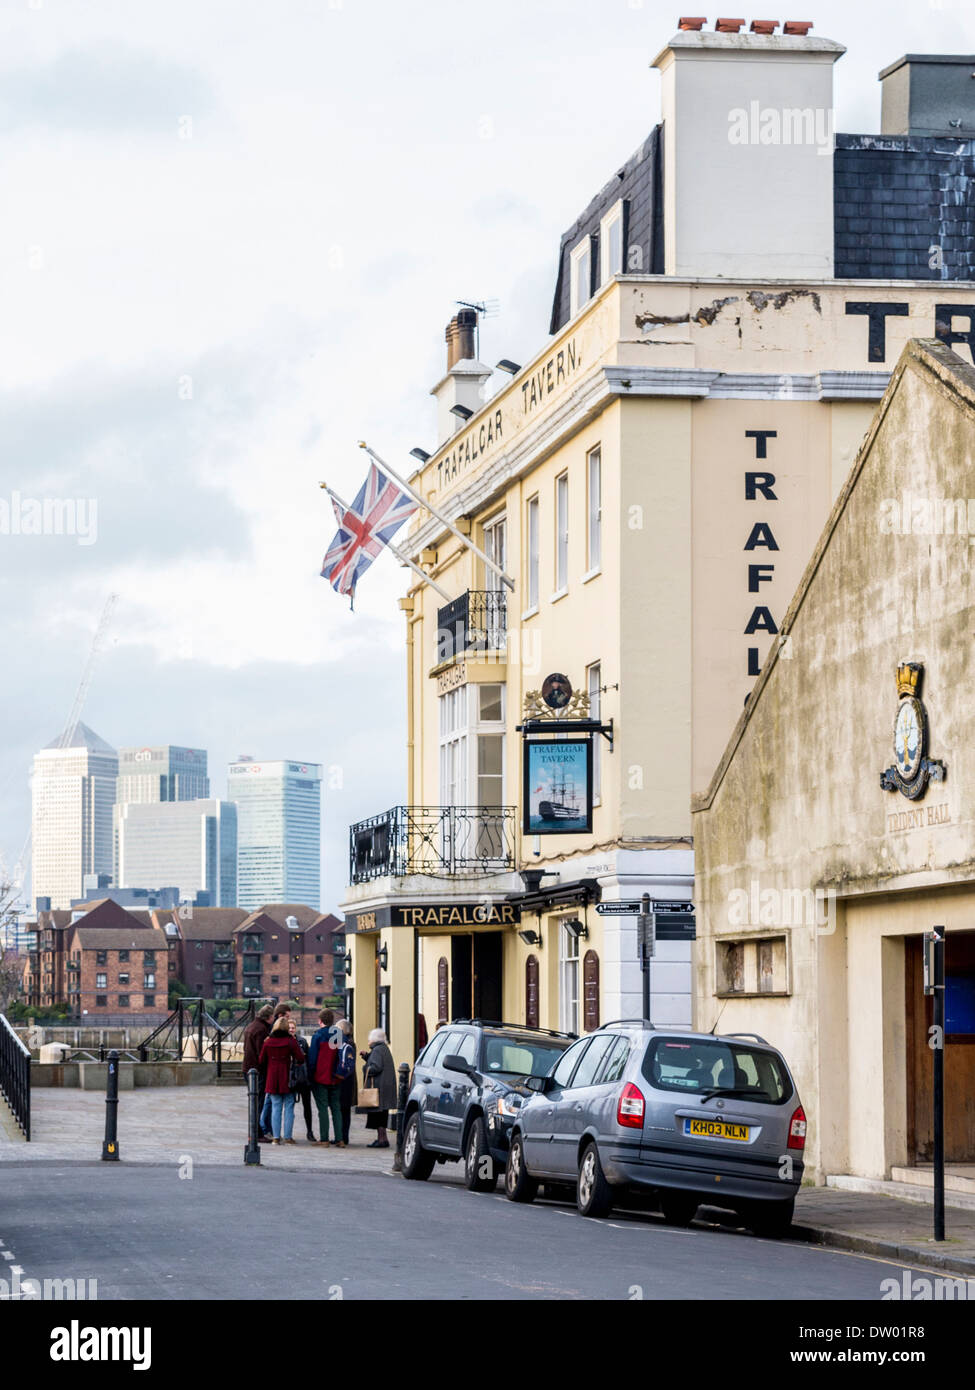 Trafalgar Tavern pub, Trident Hall stone building in Greenwich with Canary Wharf Financial Centre in the distance, London, UK Stock Photo